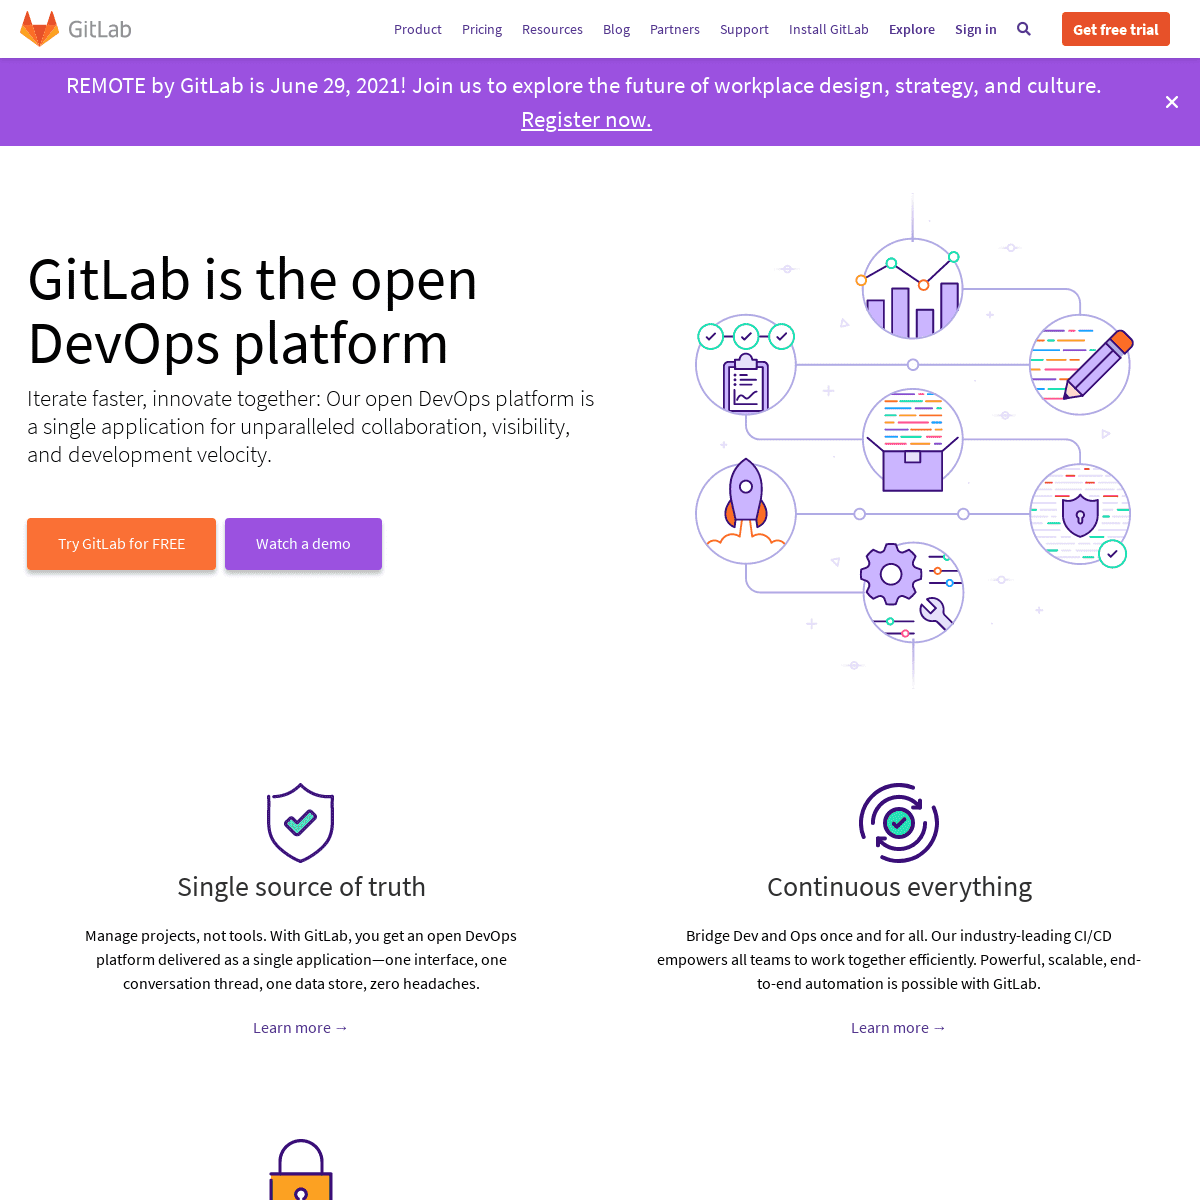 A complete backup of https://about.gitlab.com